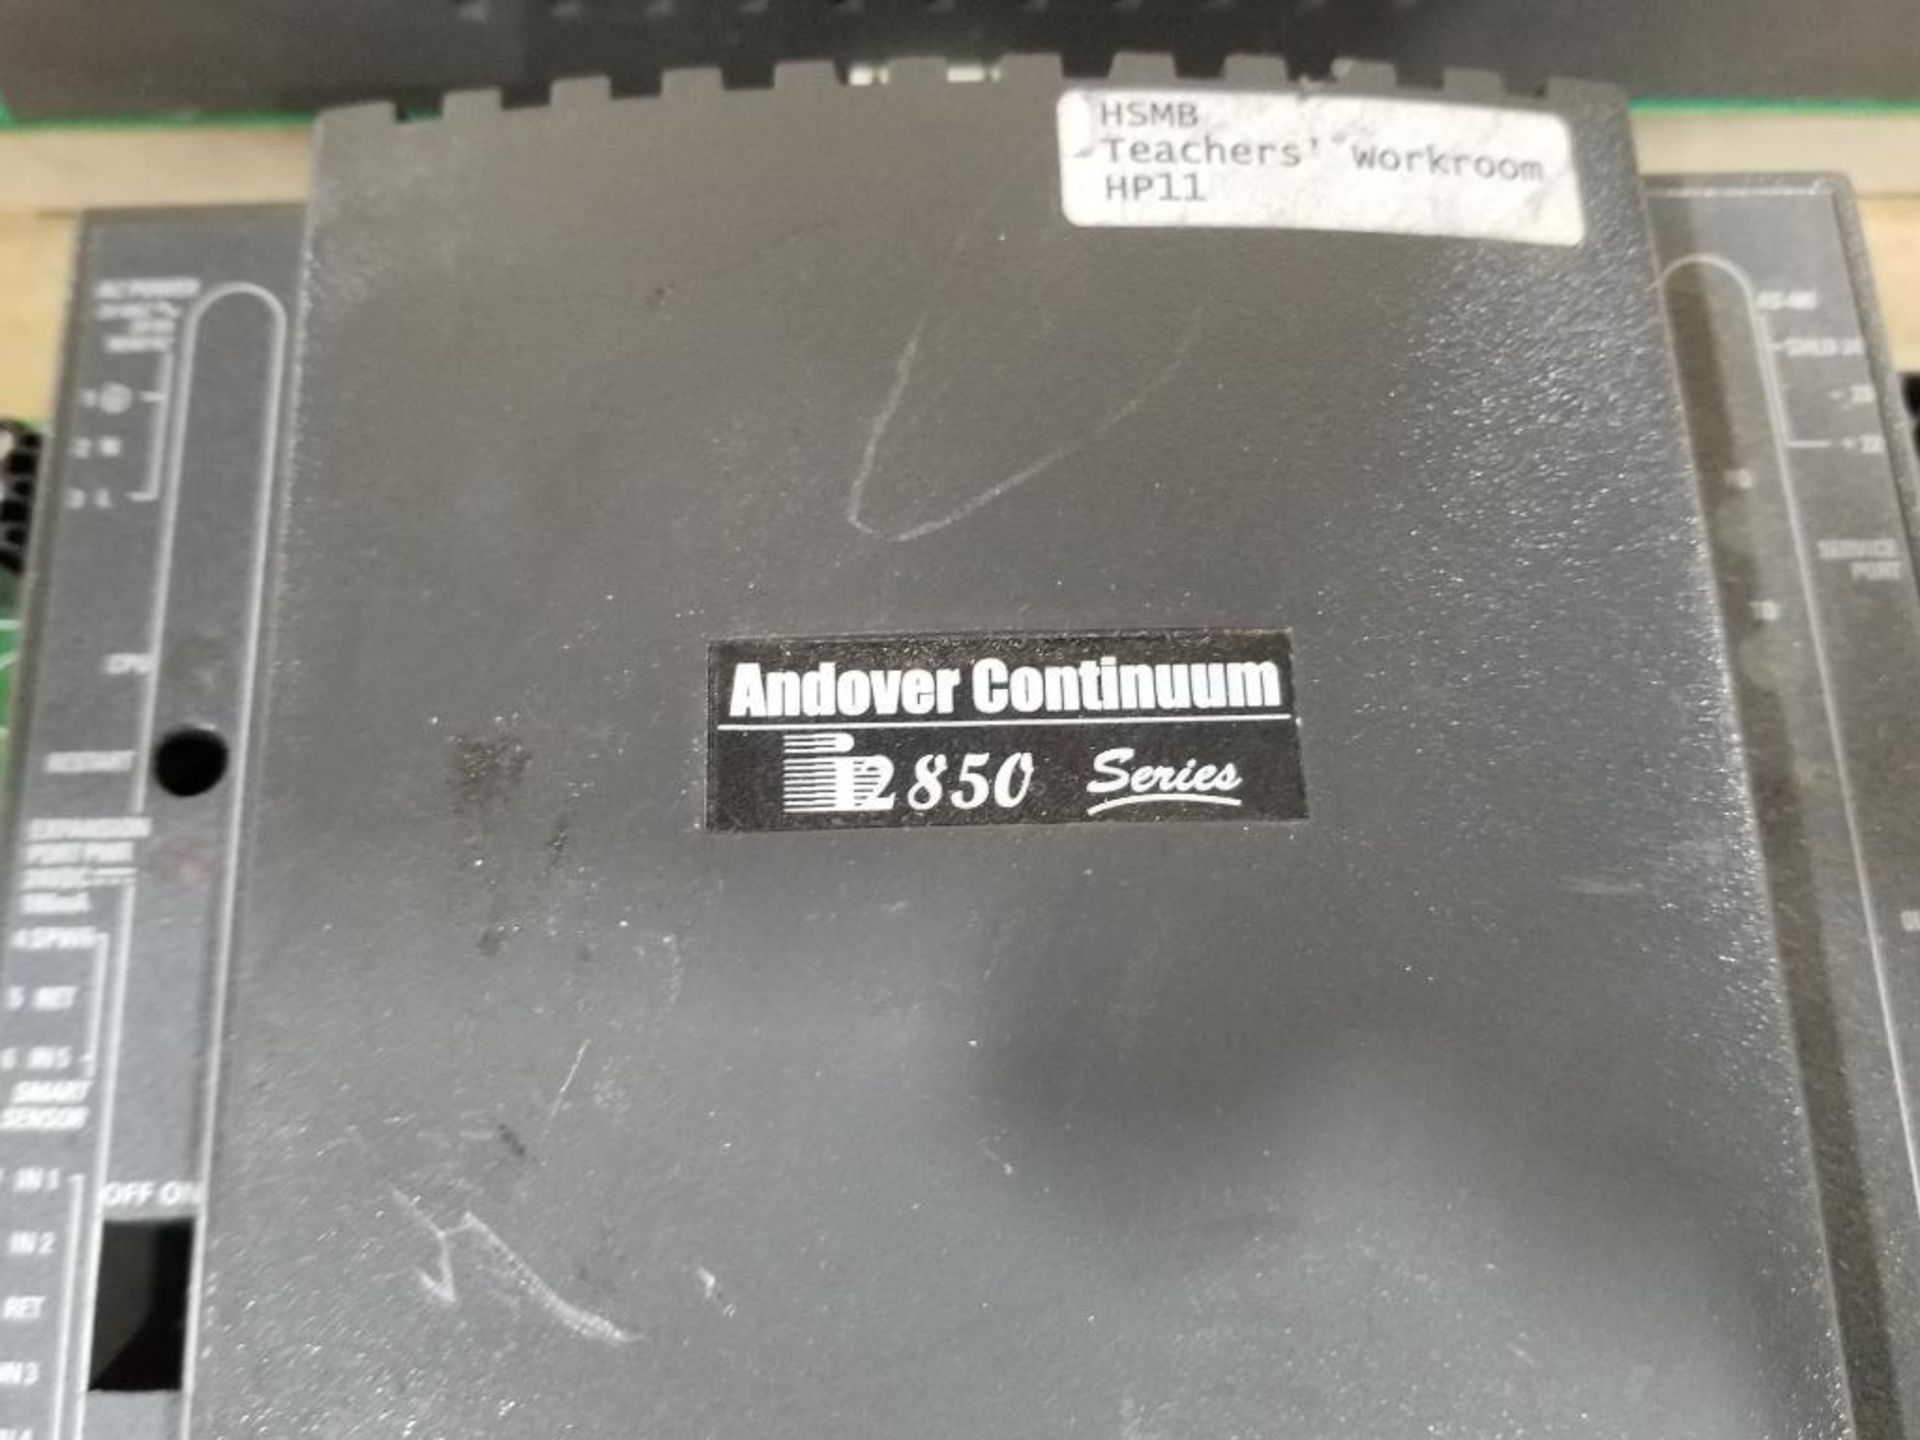 Qty 2 - Schneider Electric controller. Andover Continuum. Model B3920 and i2851. - Image 4 of 9